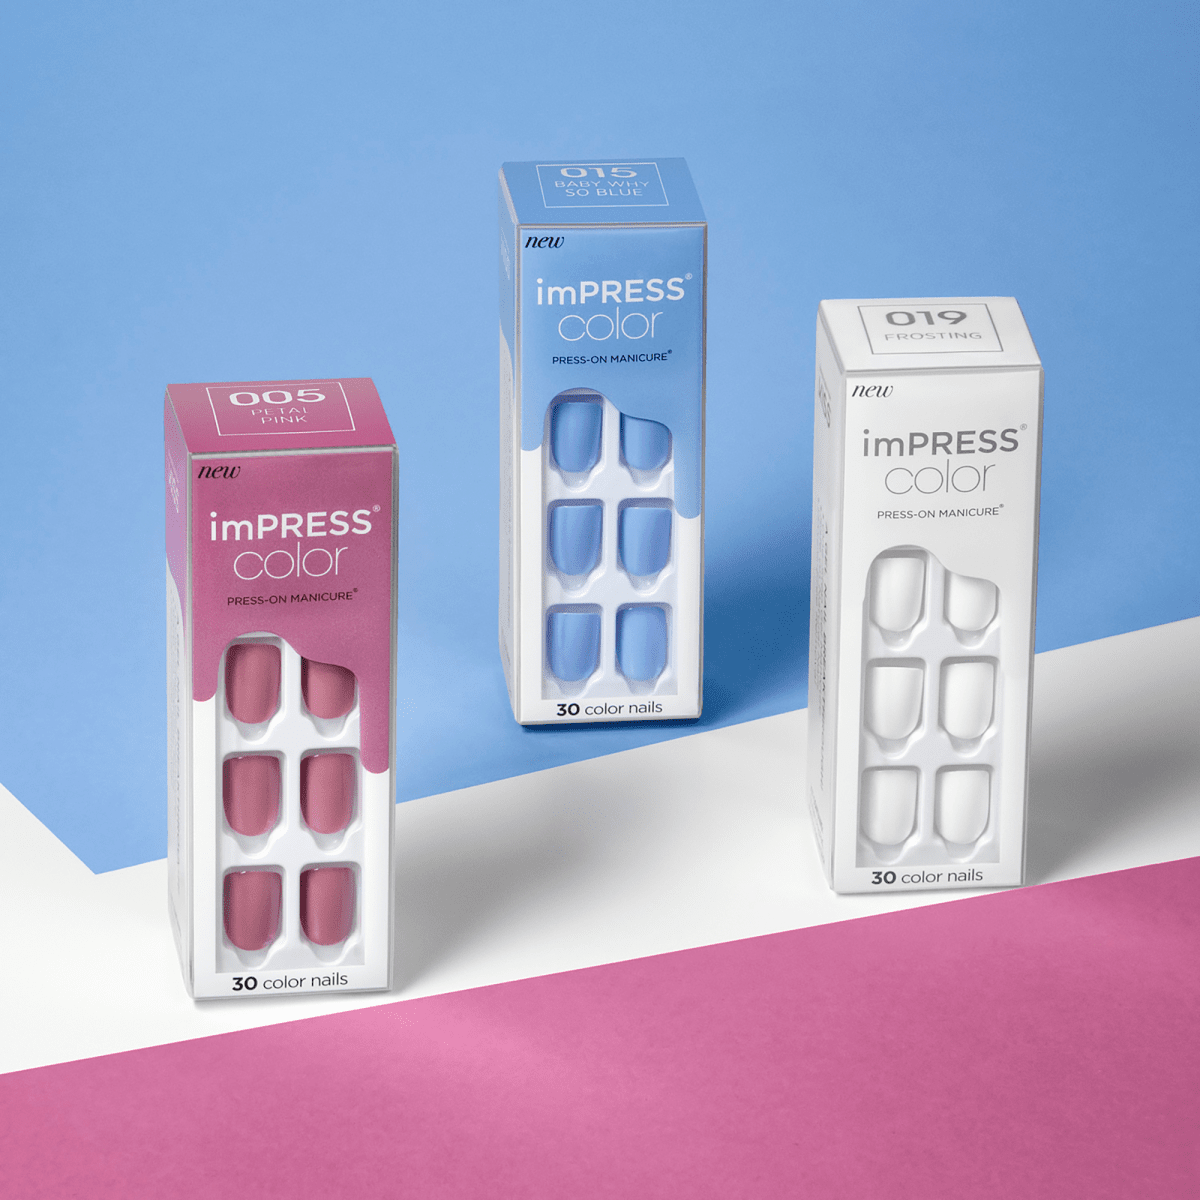 imPRESS Color Press-On Manicure - Baby Why So Blue